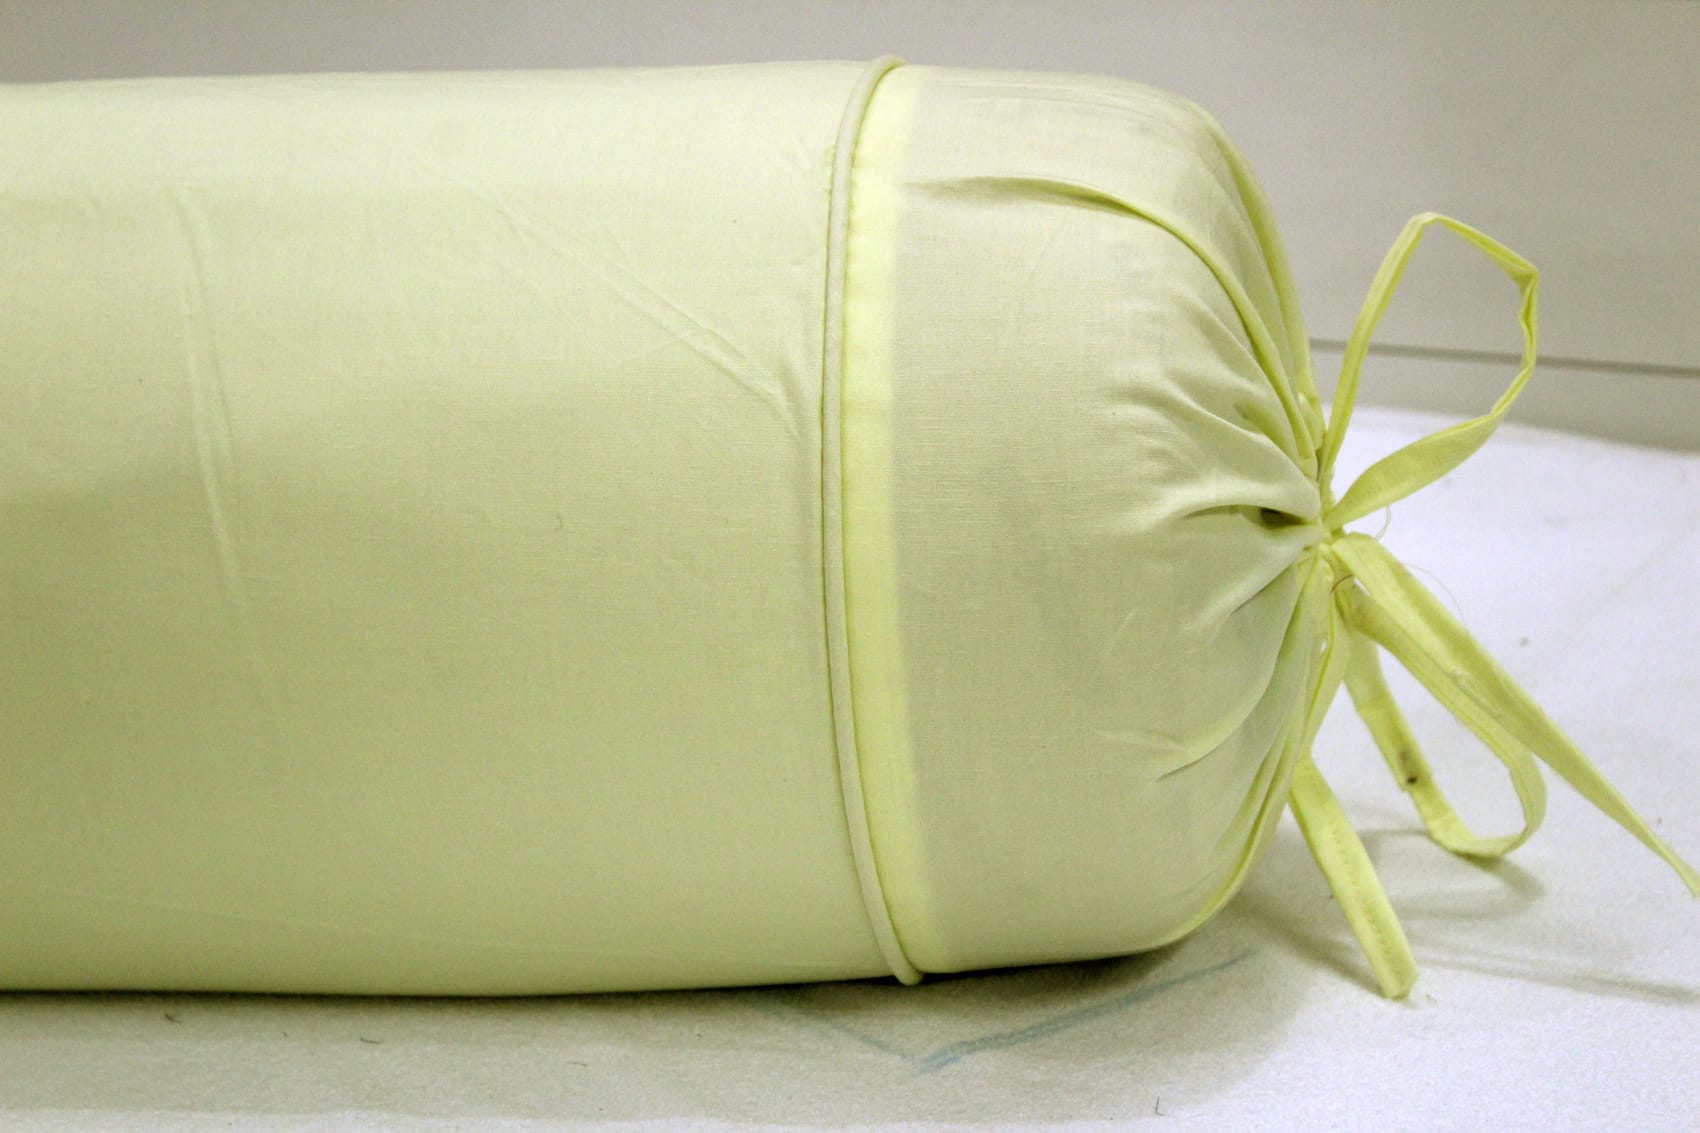 Soft Plain Cotton Bolster Cover Set 2Pcs in Light Yellow online at best prices